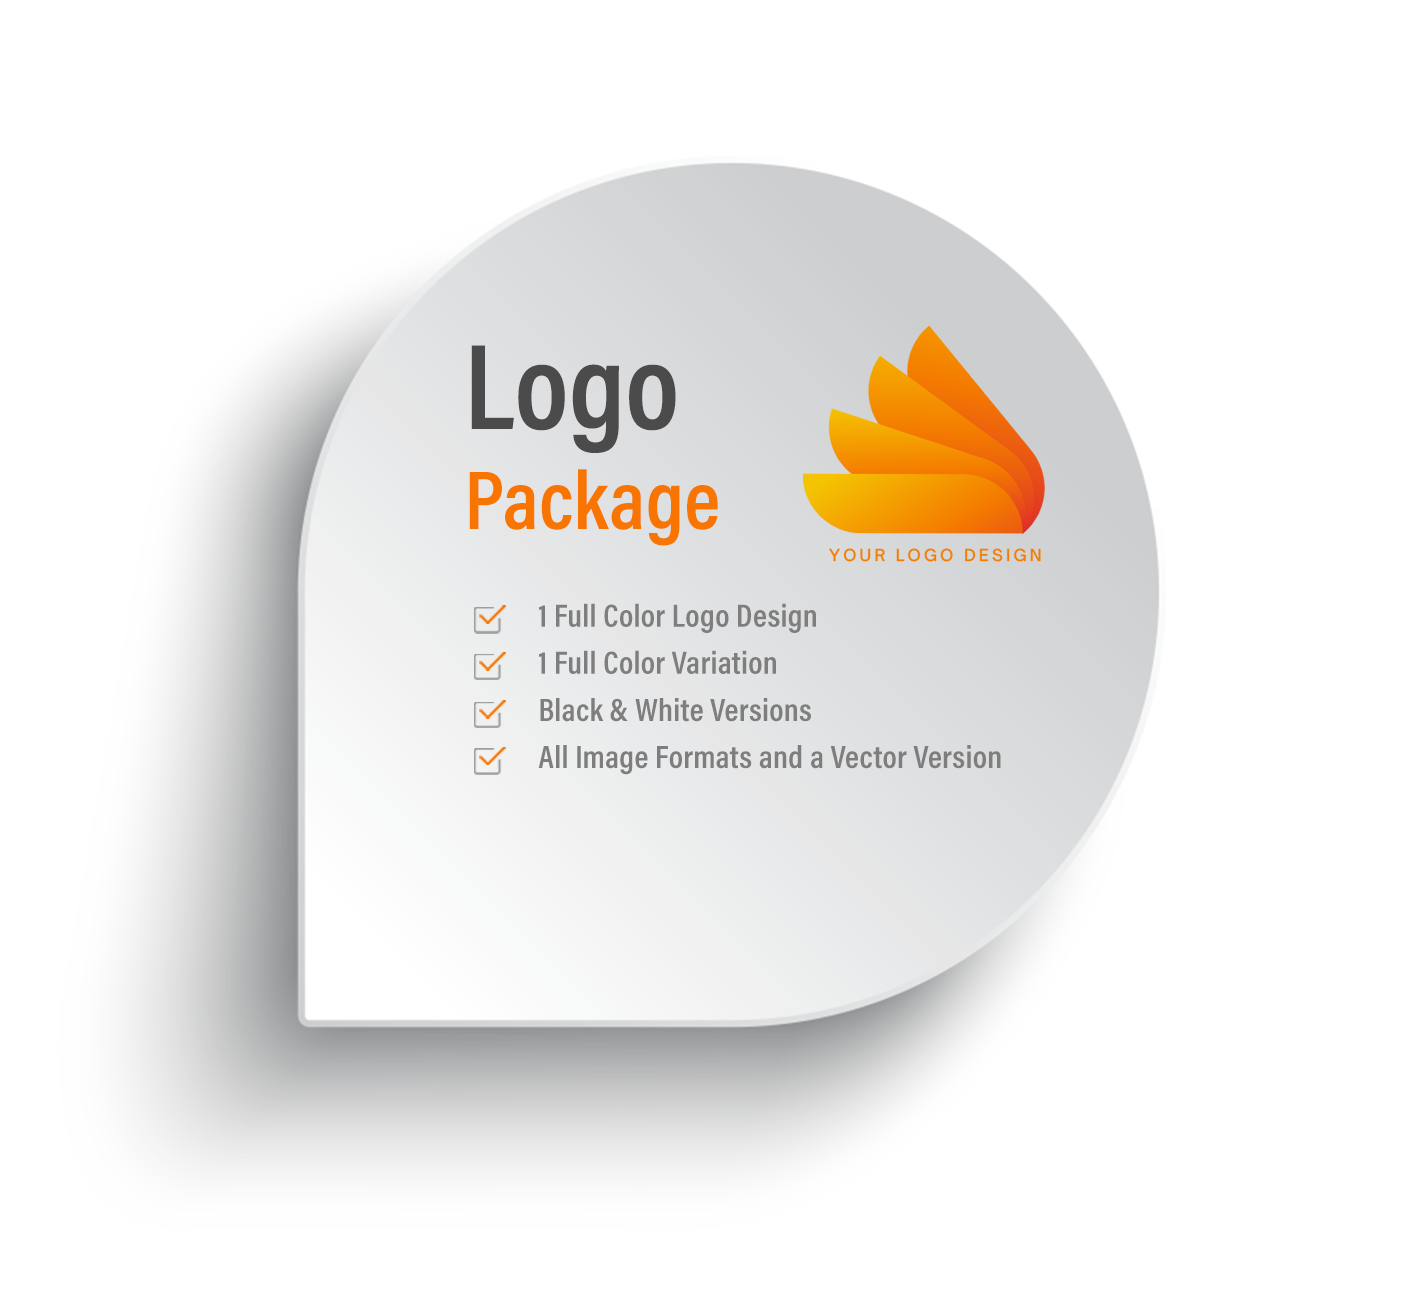 logo package2022.png